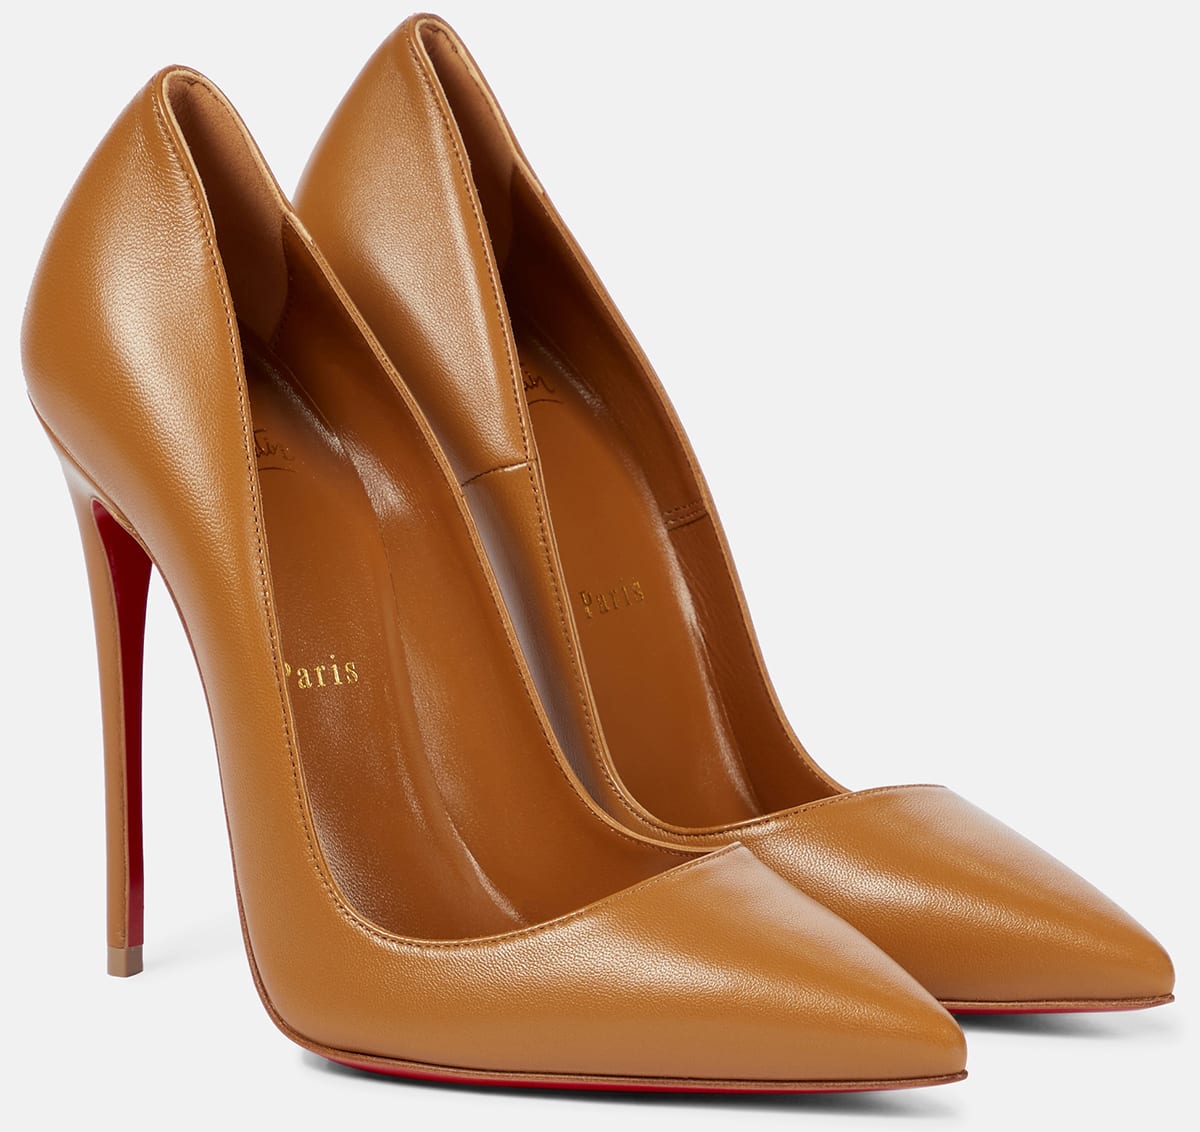 The celebrity-favorite Christian Louboutin So Kate pumps in a medium camel brown color